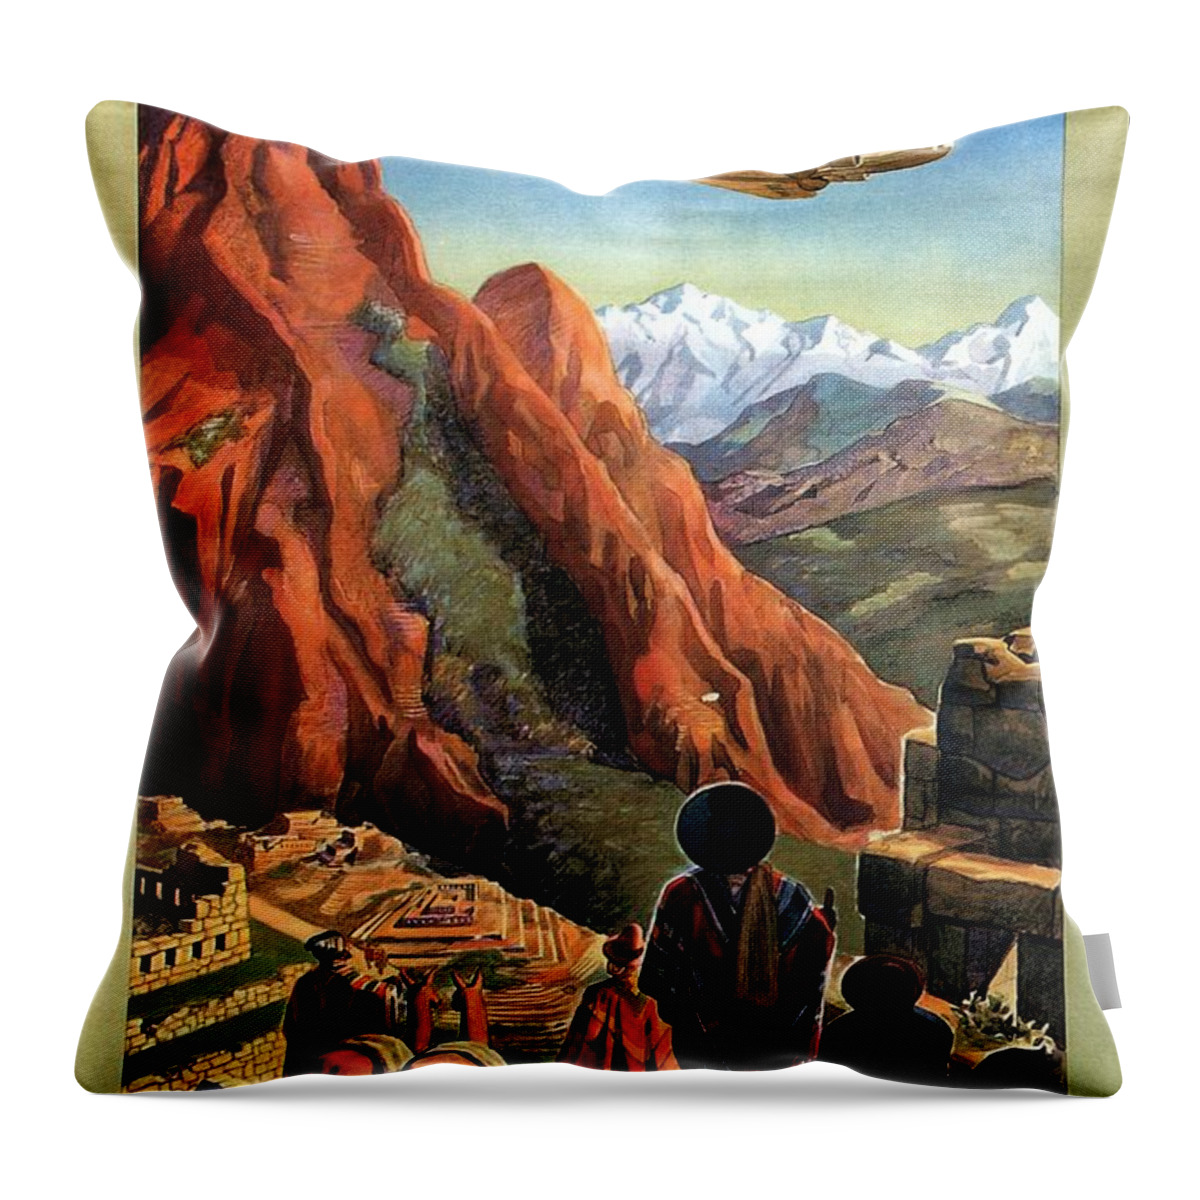 Airplane Flying Over The Mountains Throw Pillow featuring the painting Airplane flying ove the mountains in South America - Incas - Vintage Illustrated Poster by Studio Grafiikka